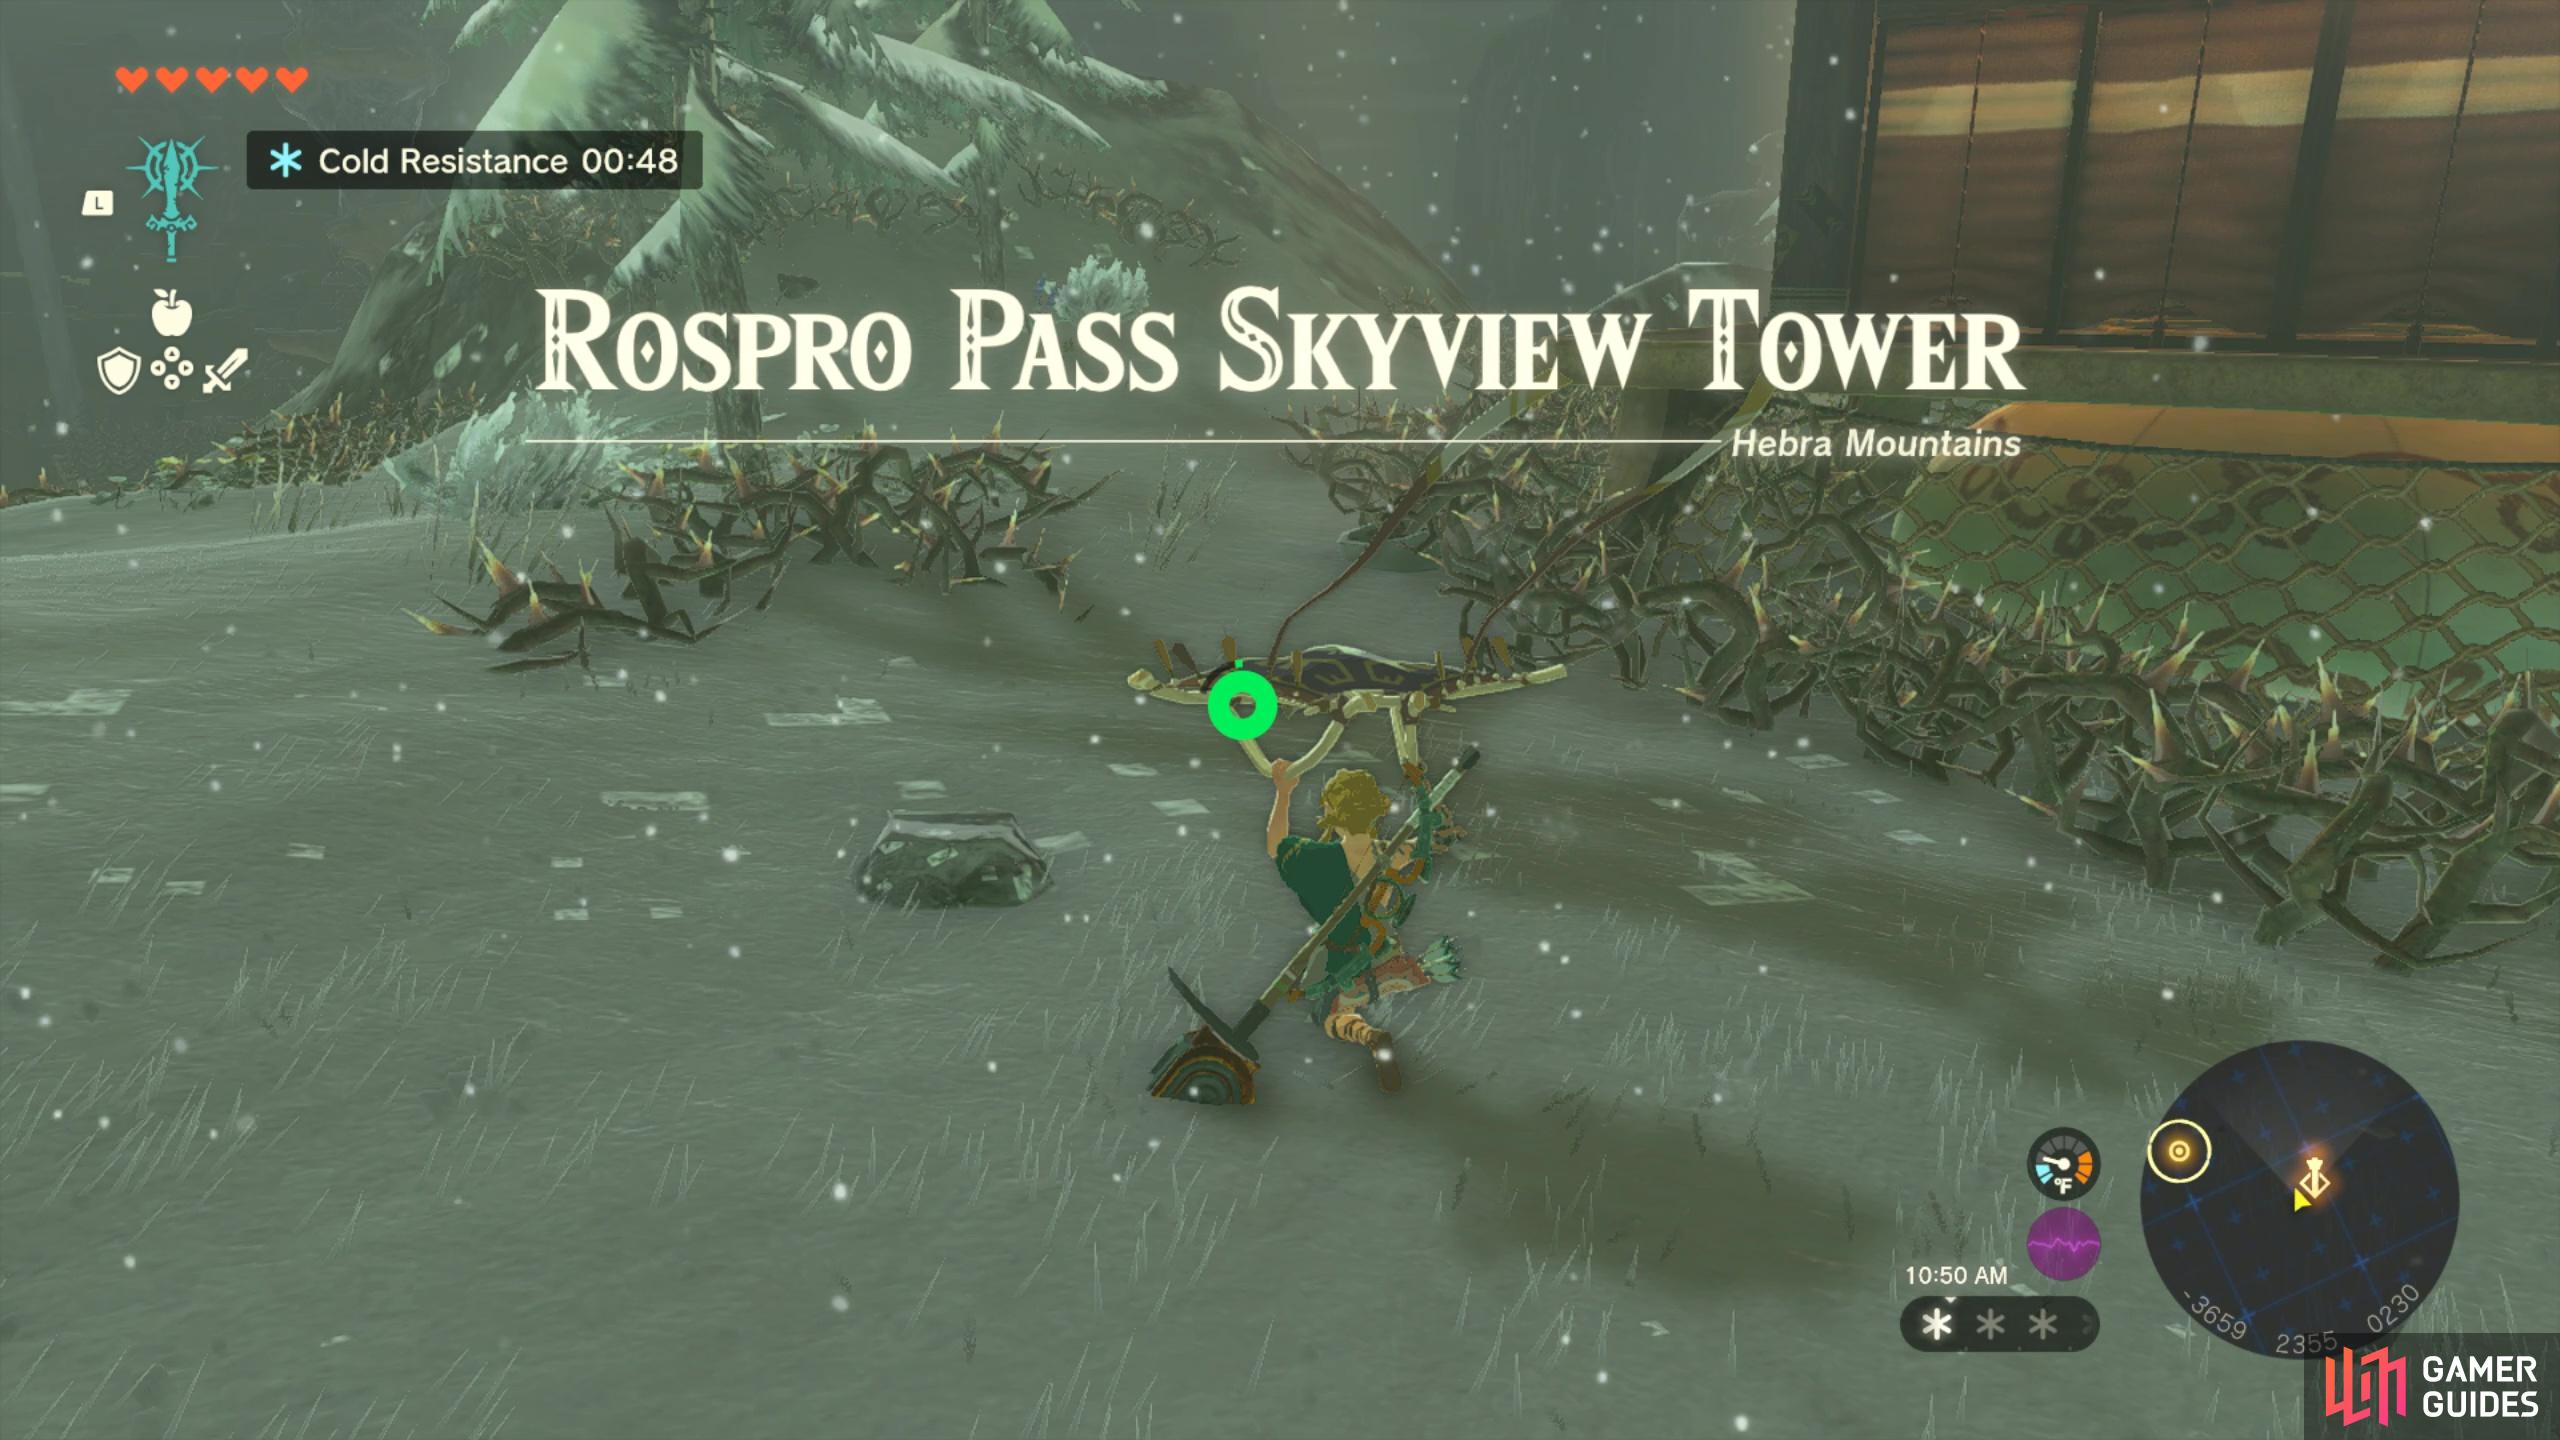 Rospro Pass Skyview Tower.